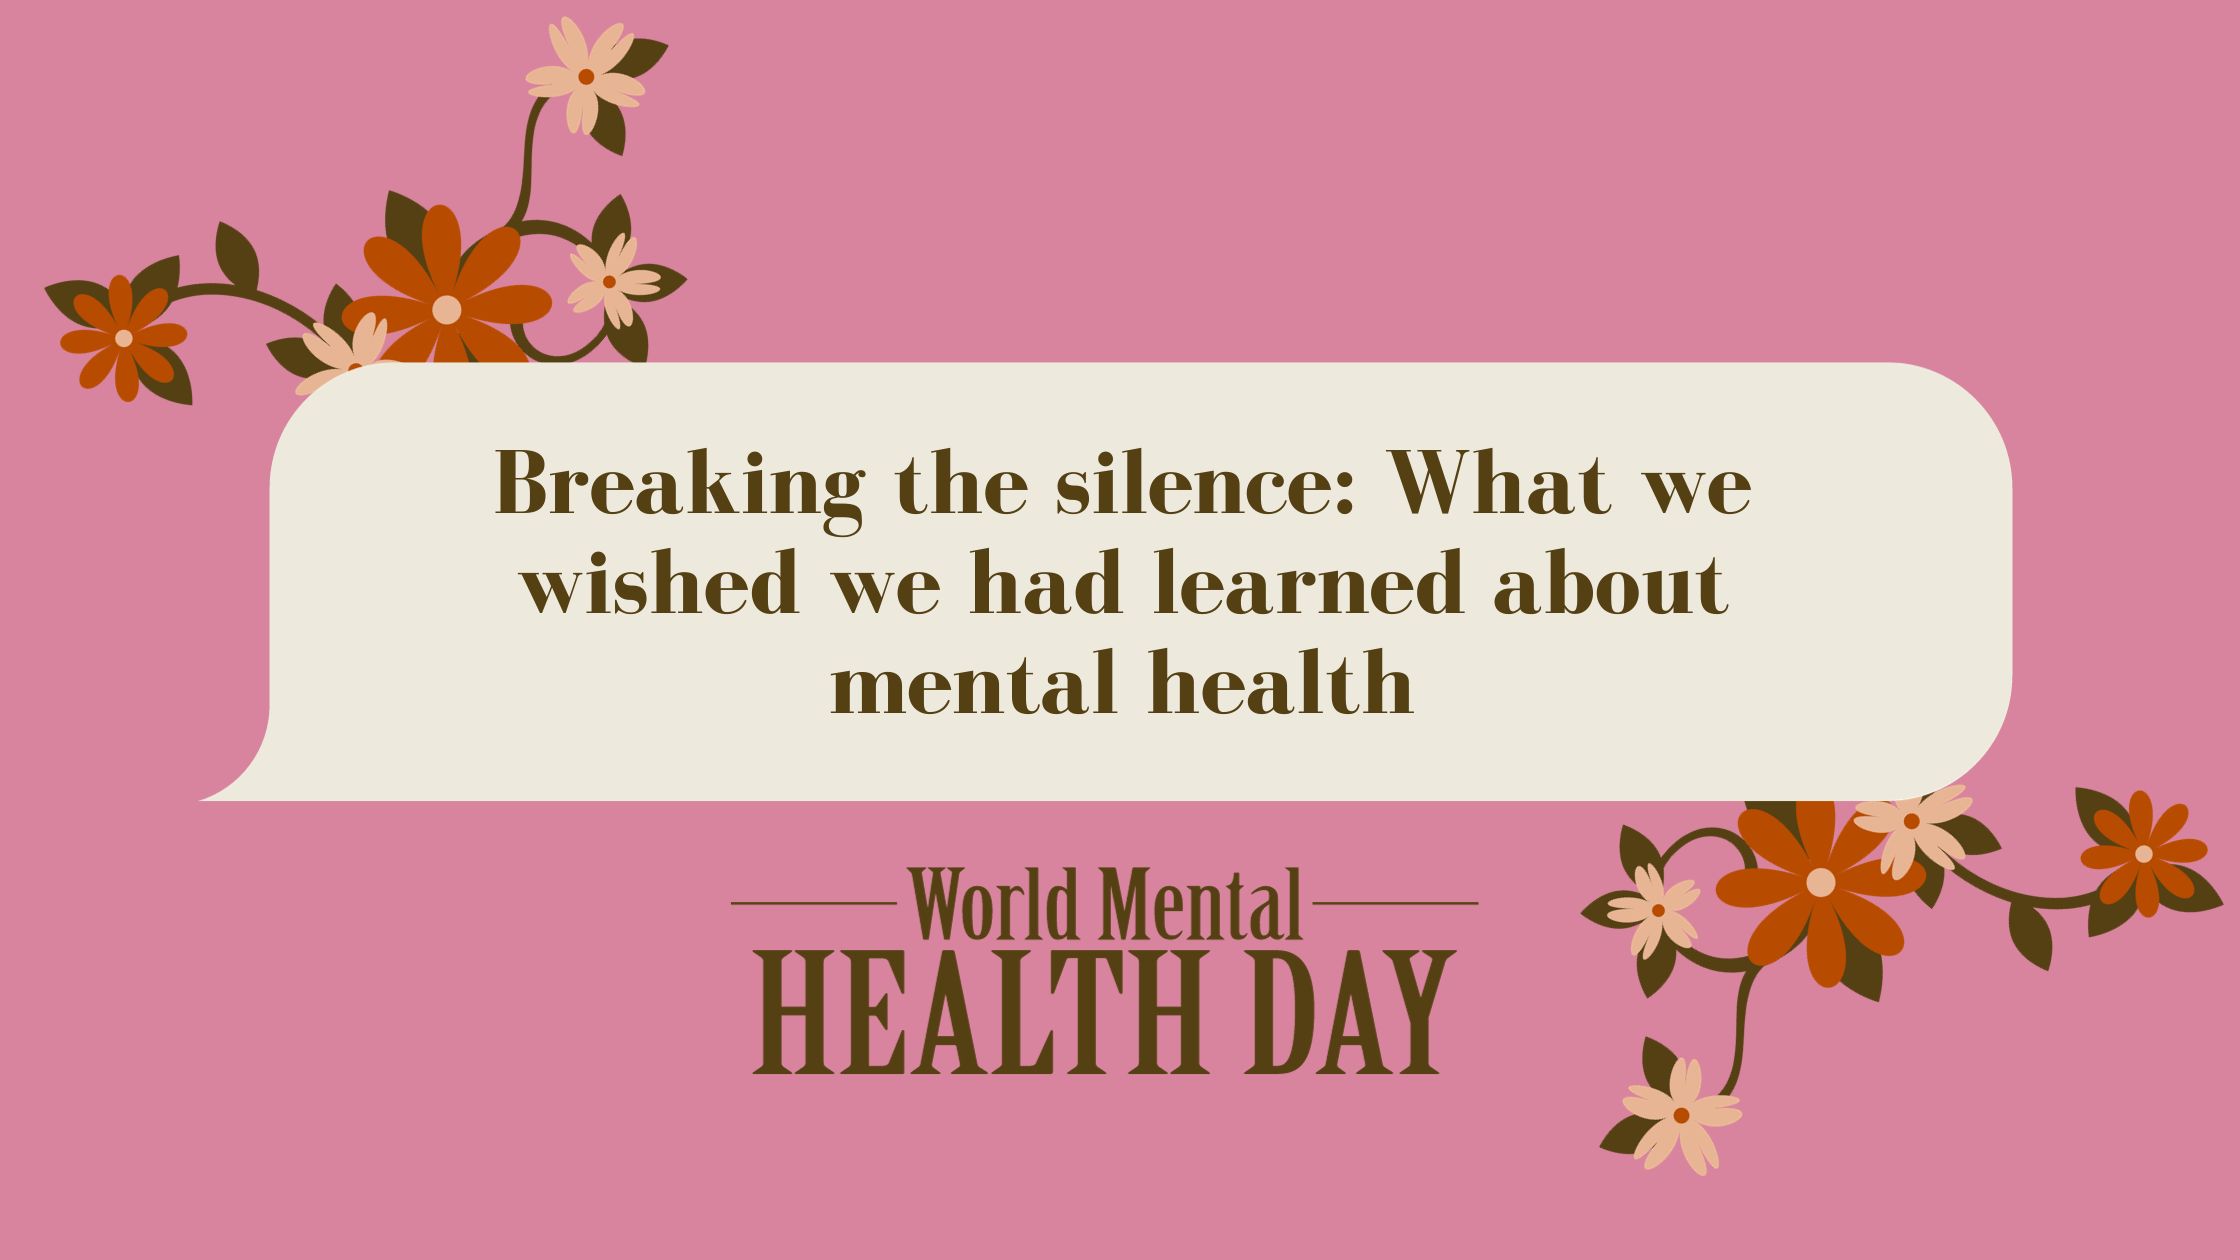 Breaking the silence: What we wished we had learned about mental health